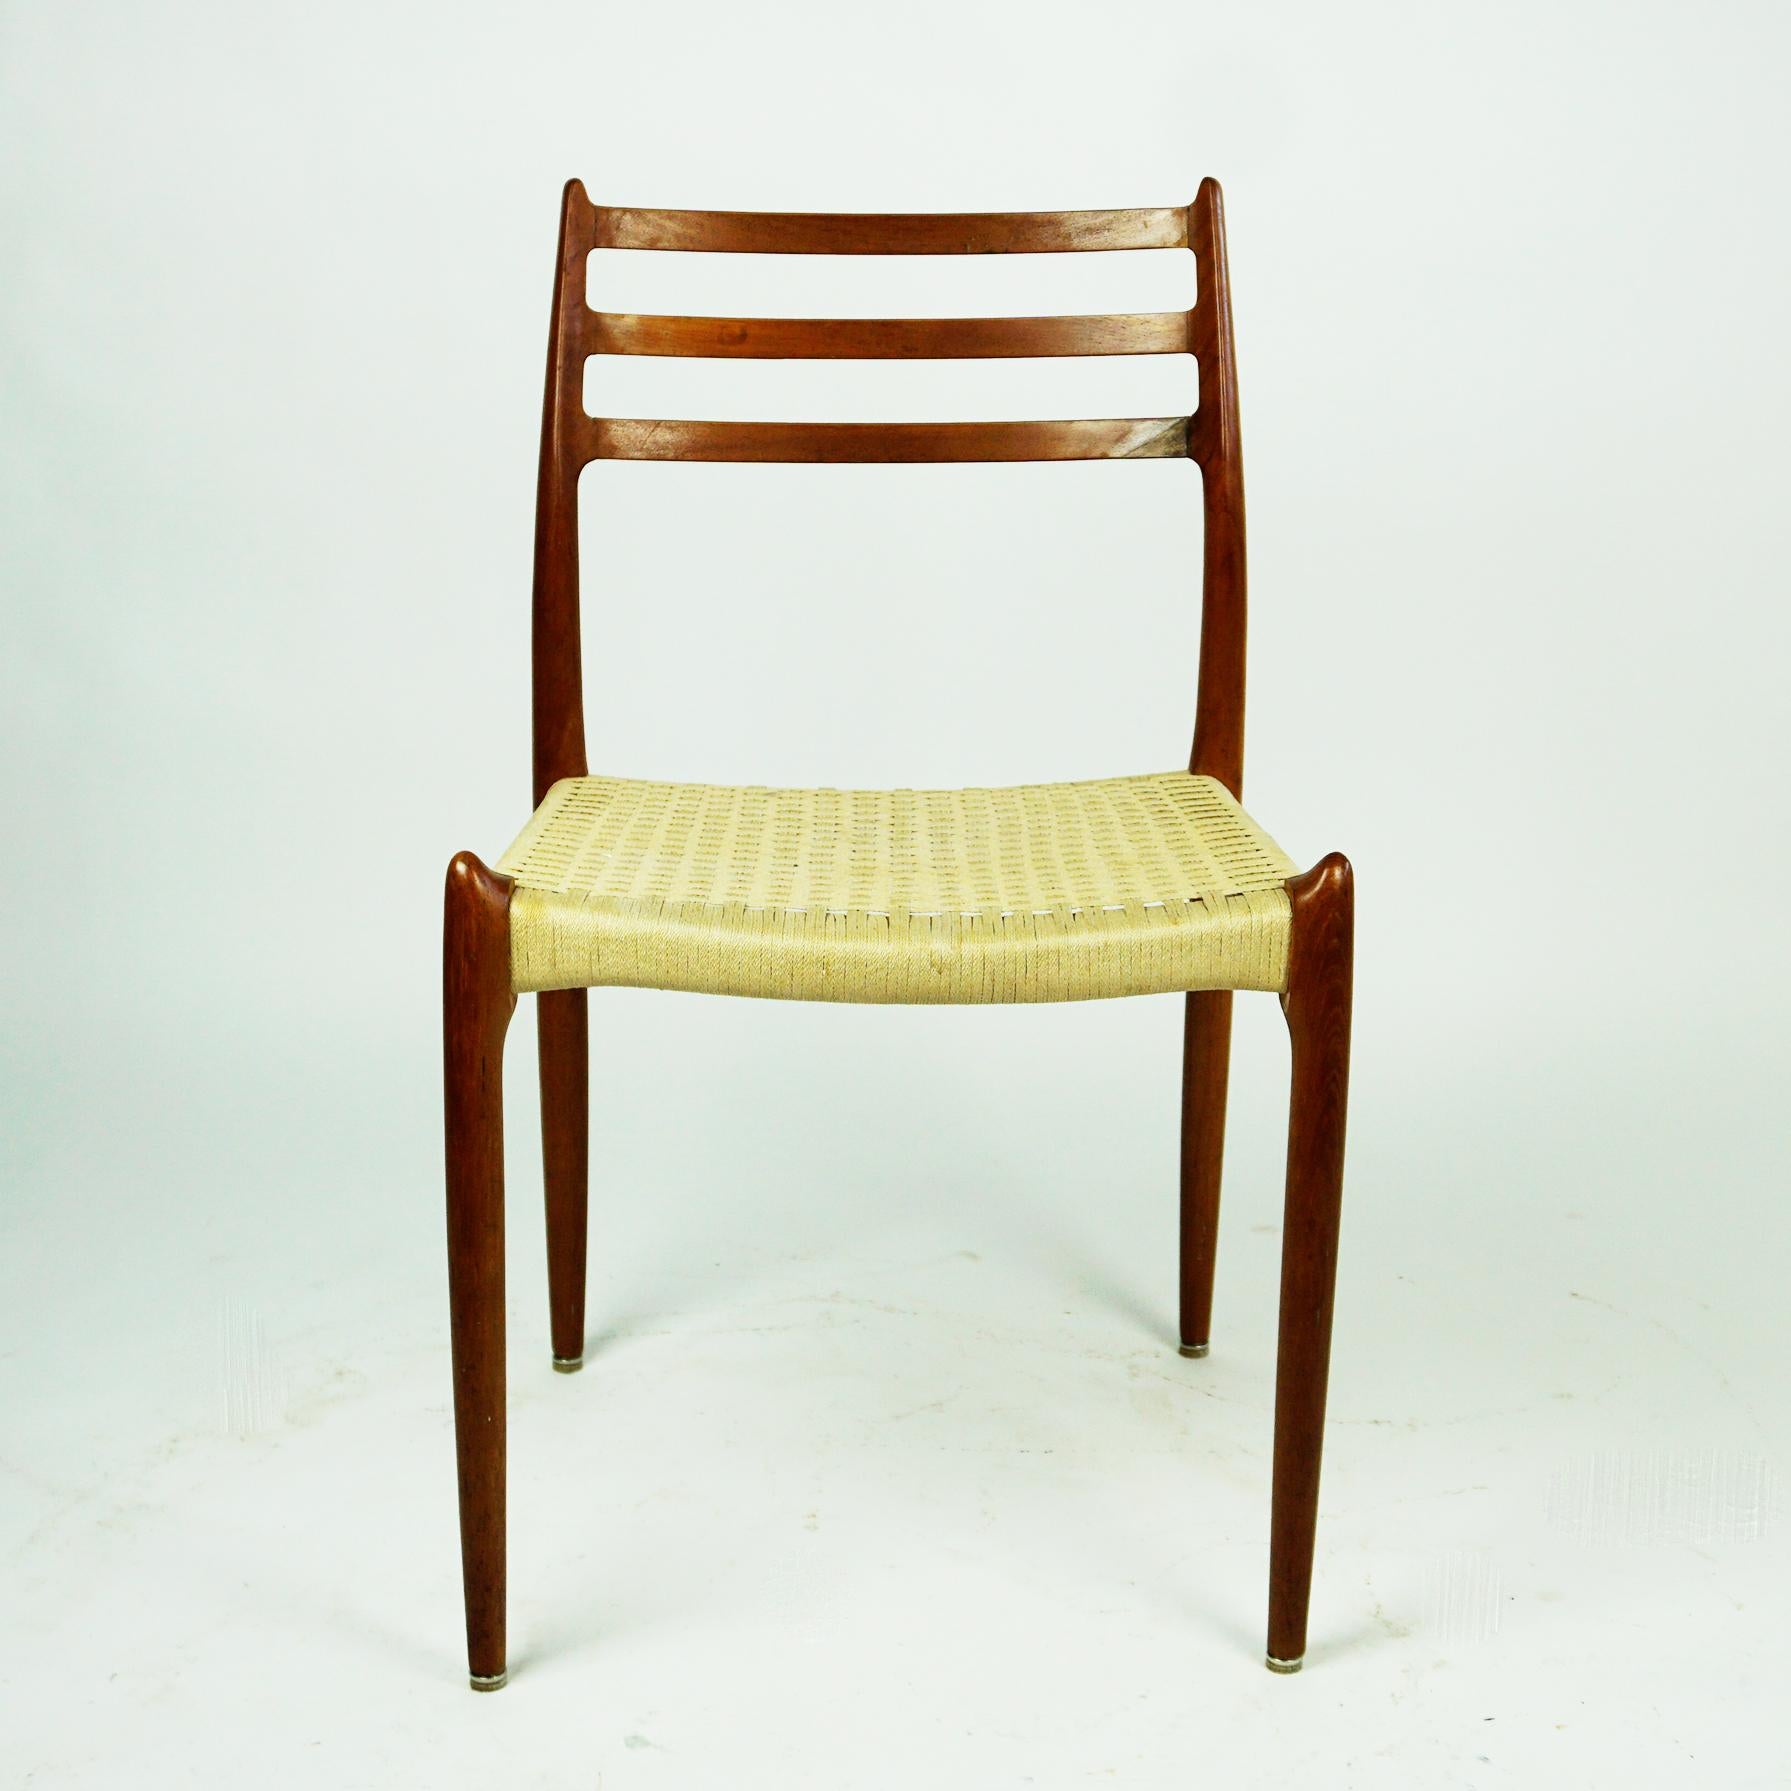 Iconic Danish modern set of four teak dining chairs Mod. 78 with Textile cord seats designed by Niels Otto Moller in 1962 and produced by J.L. Mollers Mobelfabrik in Denmark. Early production in very good original Condition, seats with some wear due